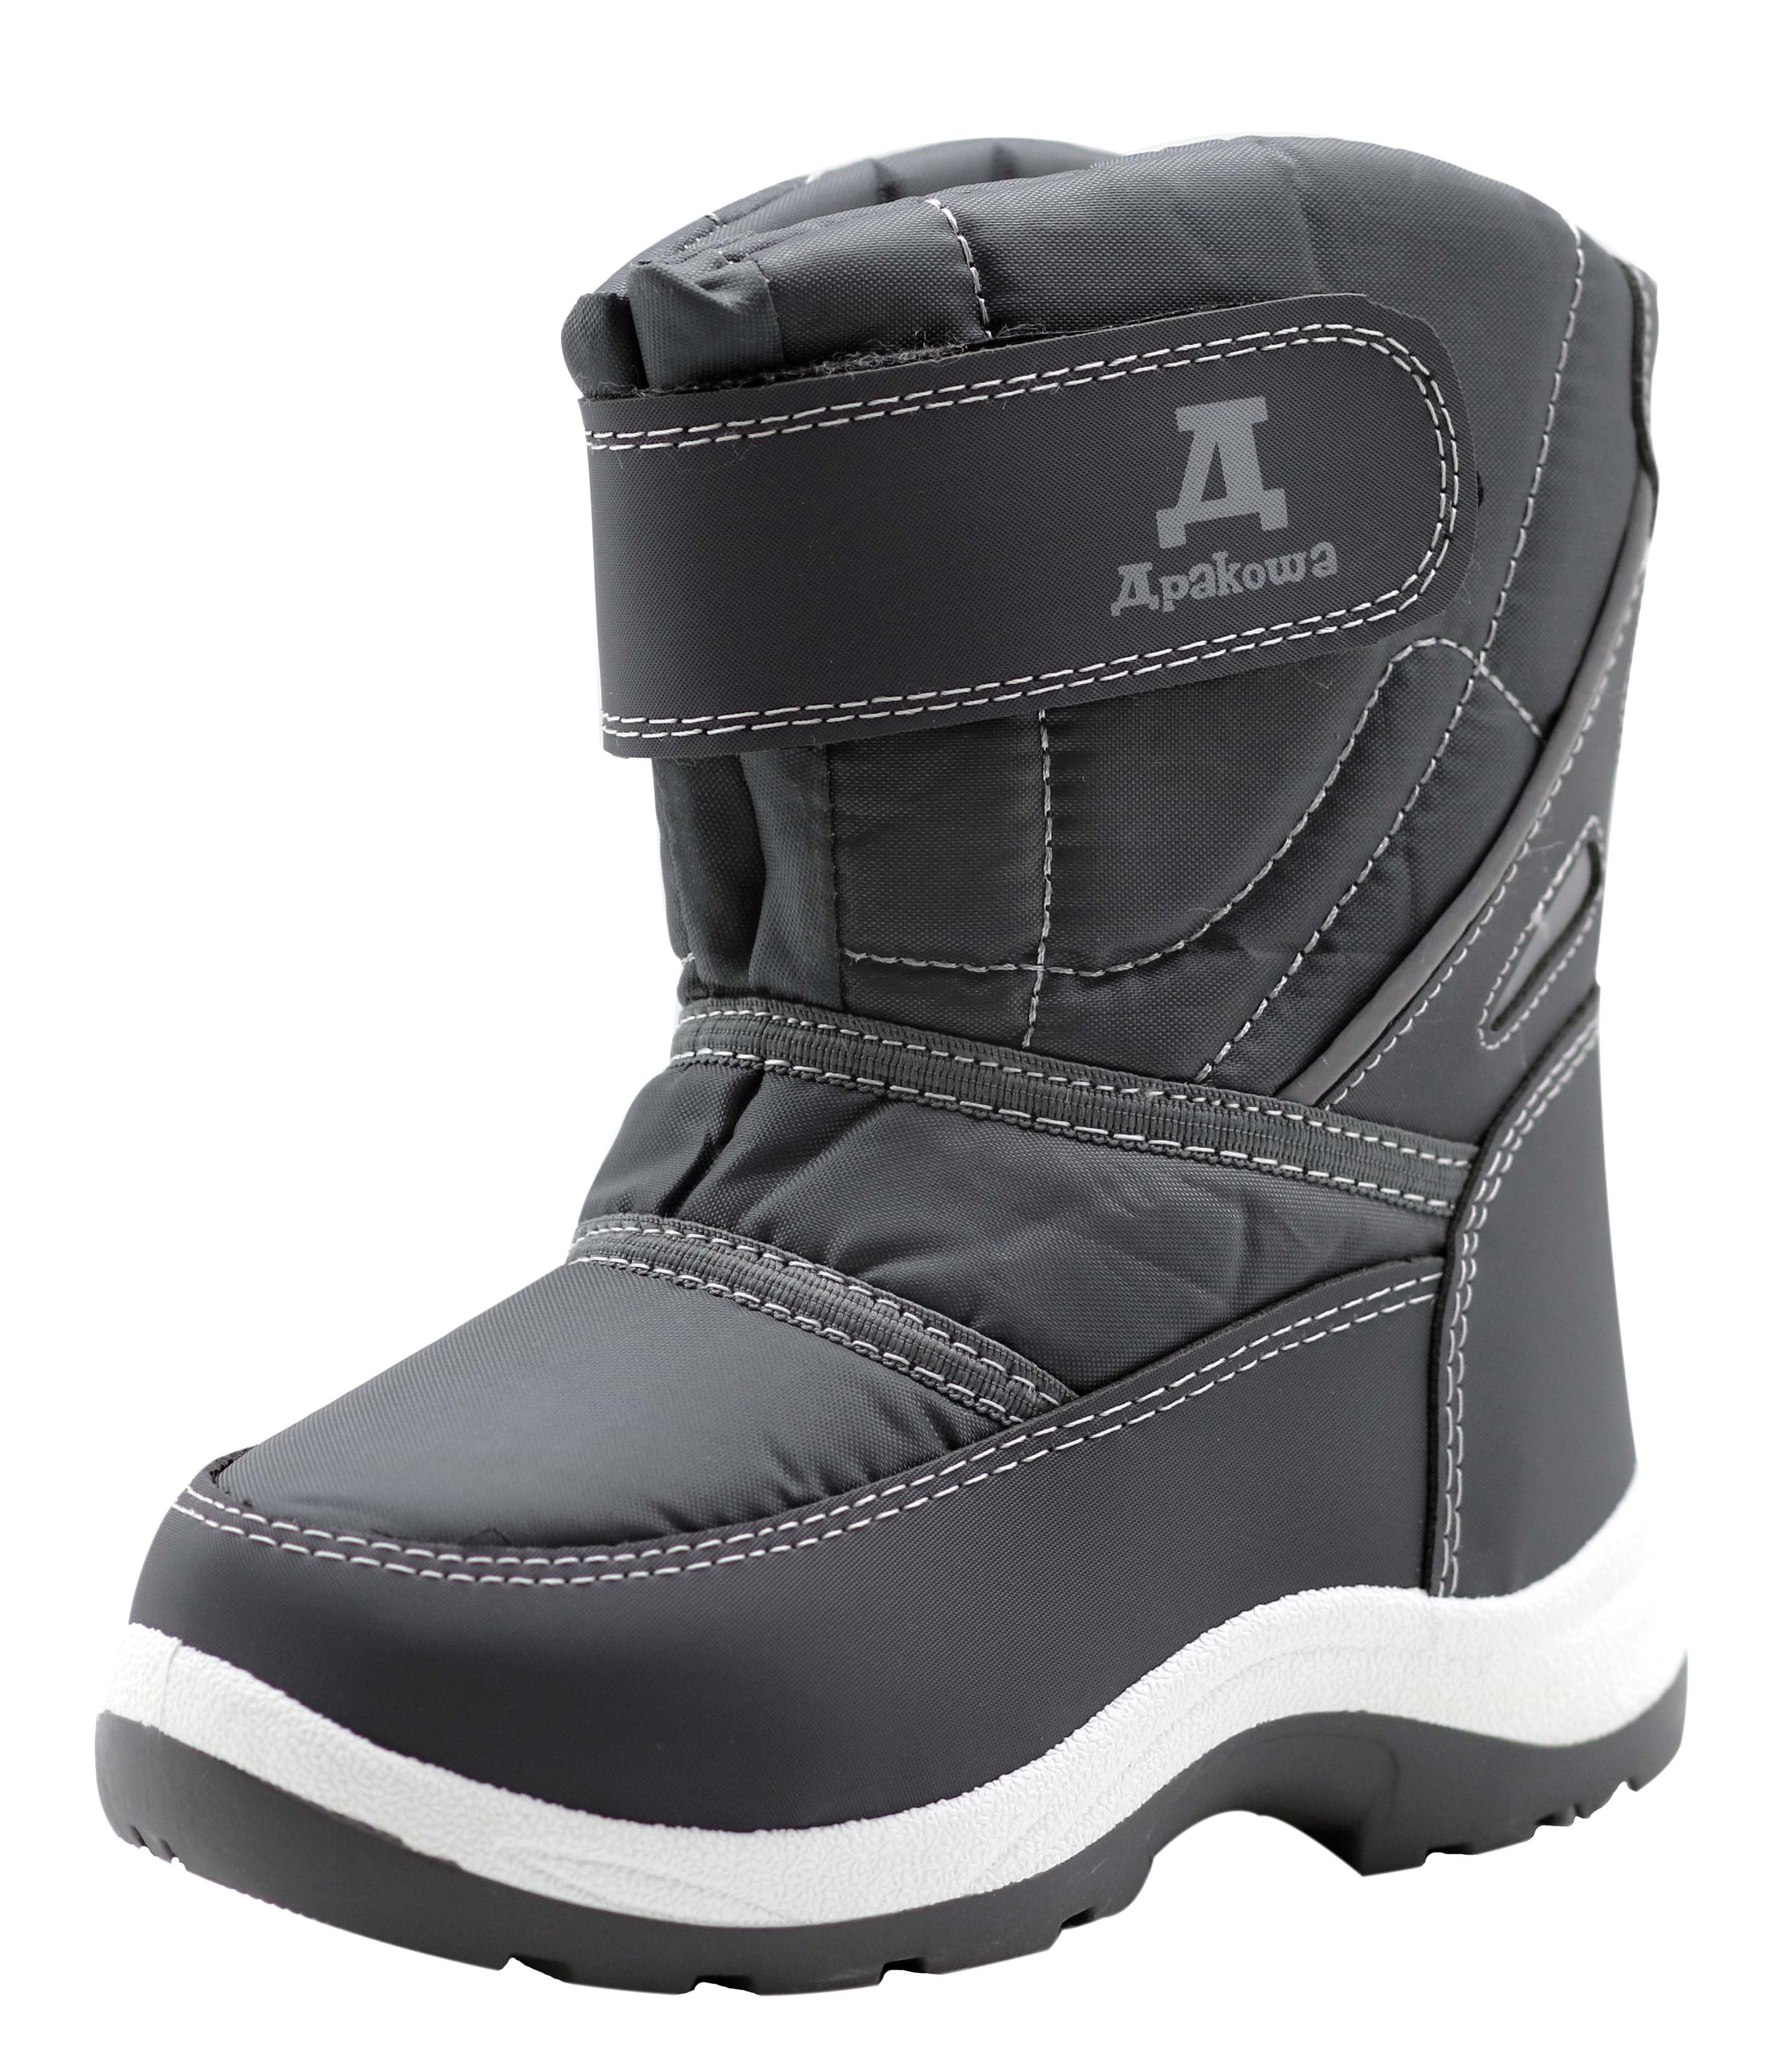 Apakowa New Kids Boys Cold Weather Snow Boots (Toddler/Little Kid ...